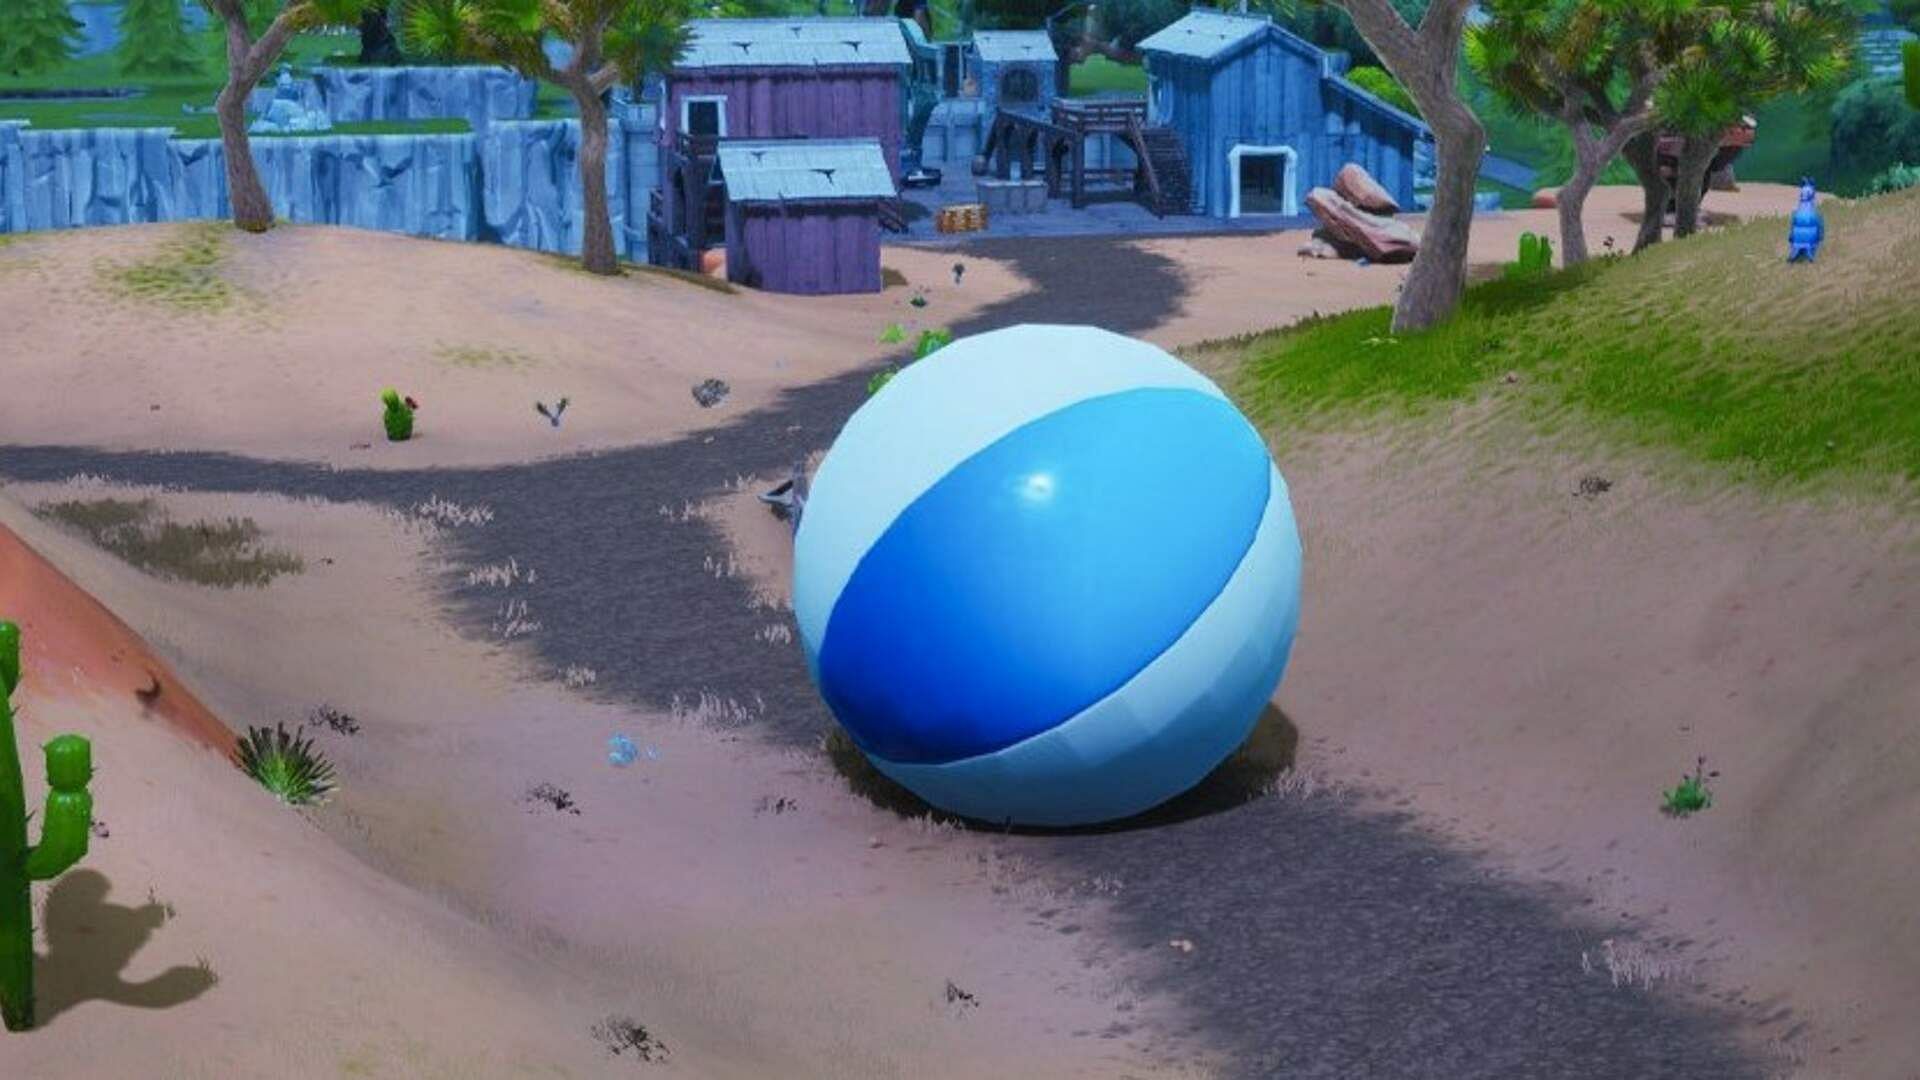 Another Fortnite Summer challenge requires players to kick a giant beach ball (Image via Epic Games)